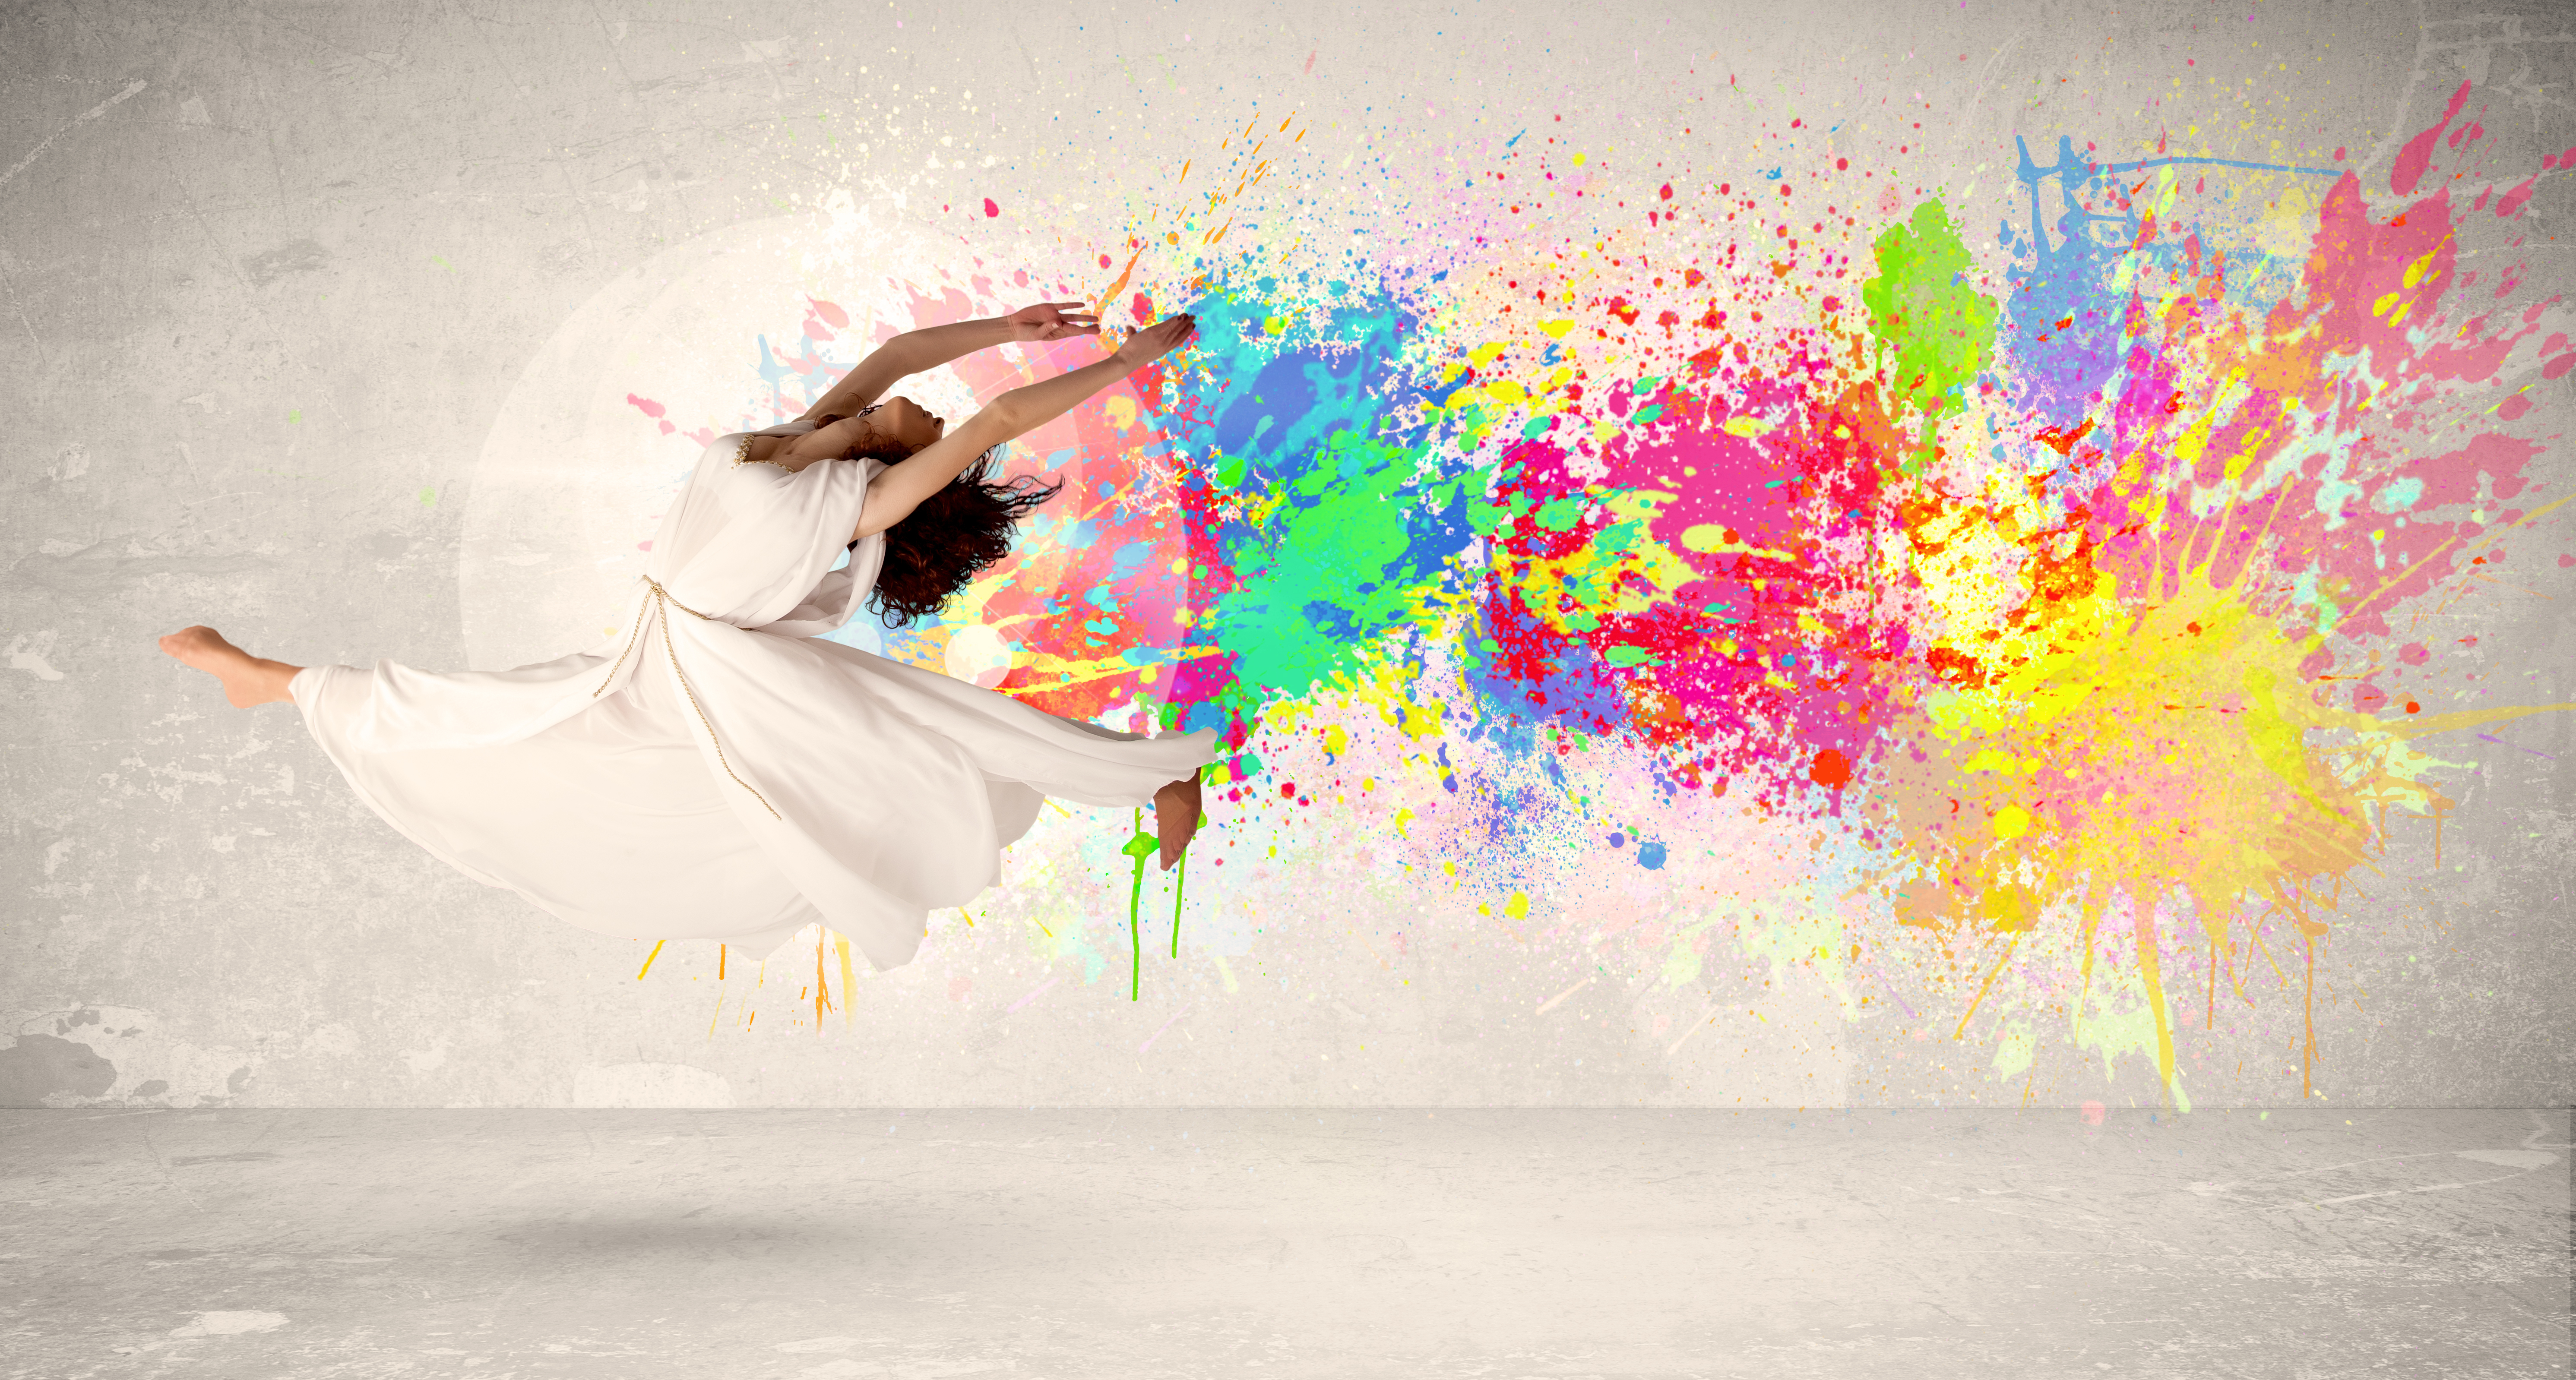 Happy teenager jumping with colorful ink splatter on urban background 